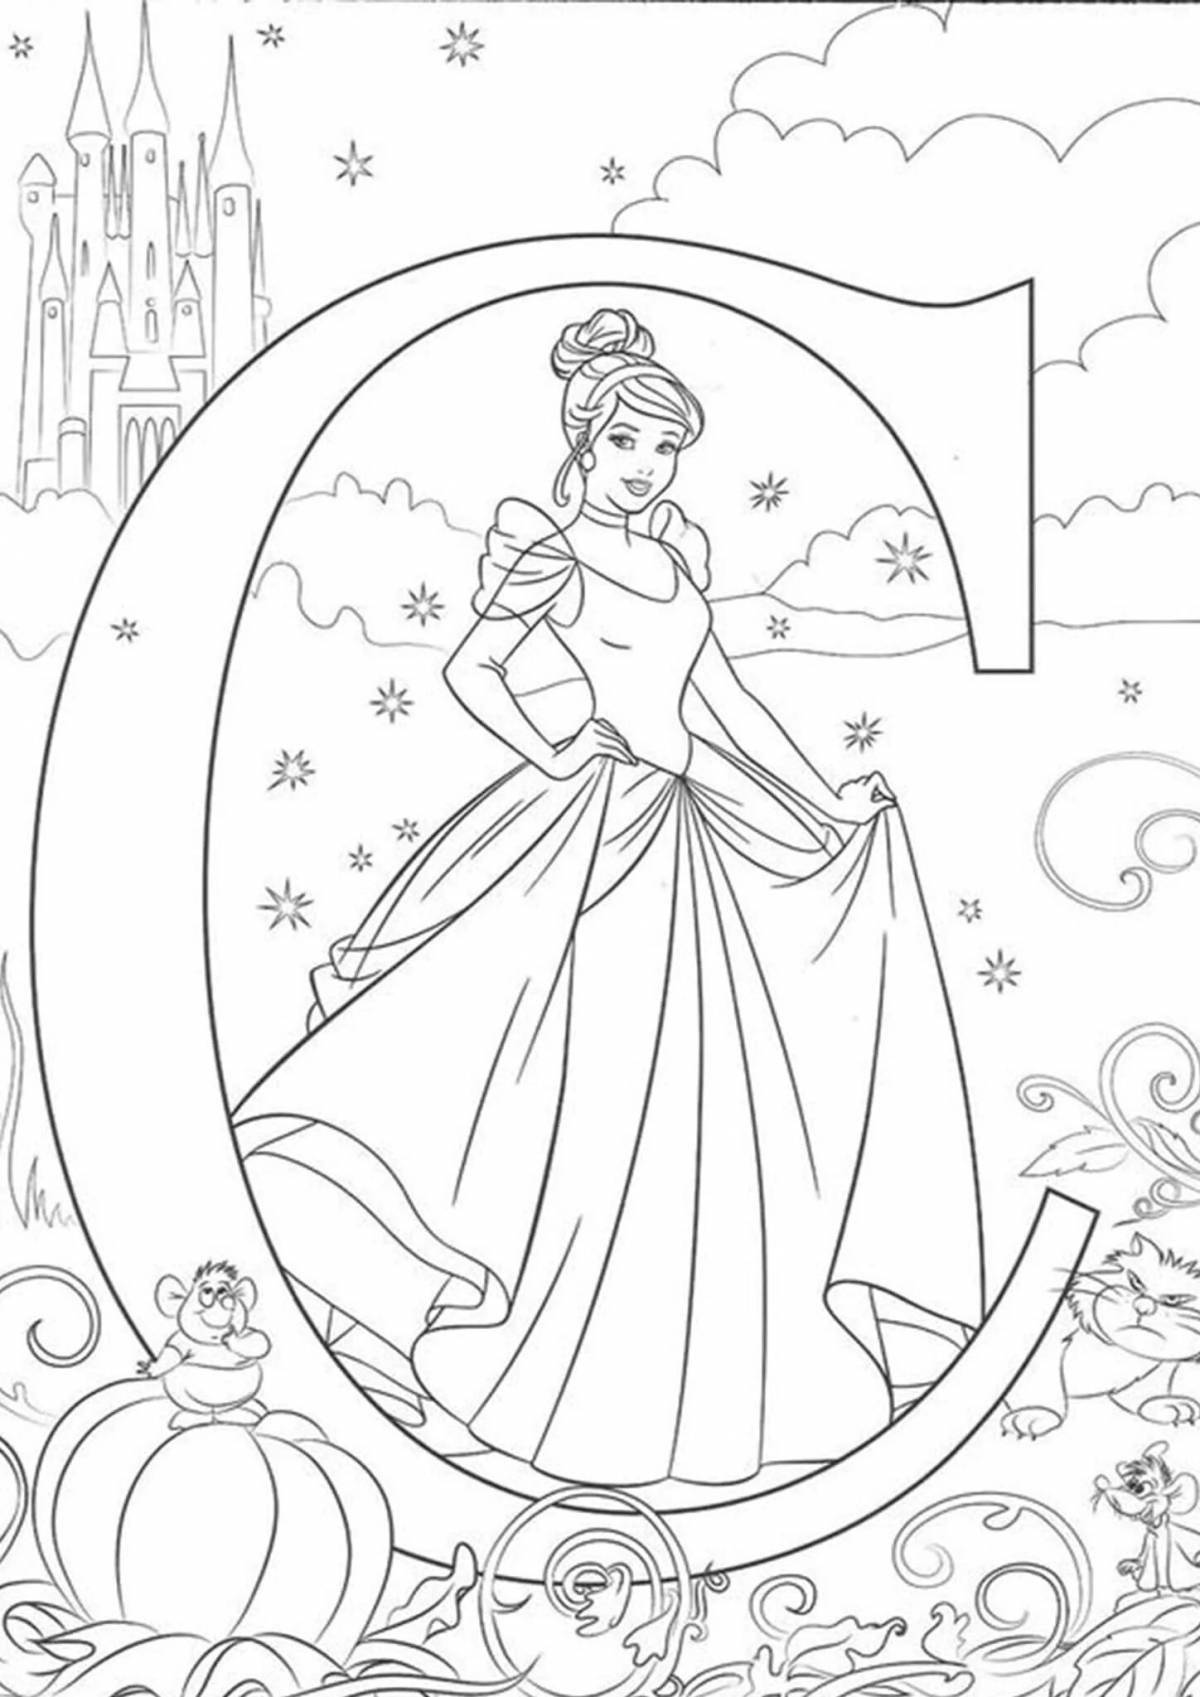 Color-frenzy coloring book for 25 year old girls